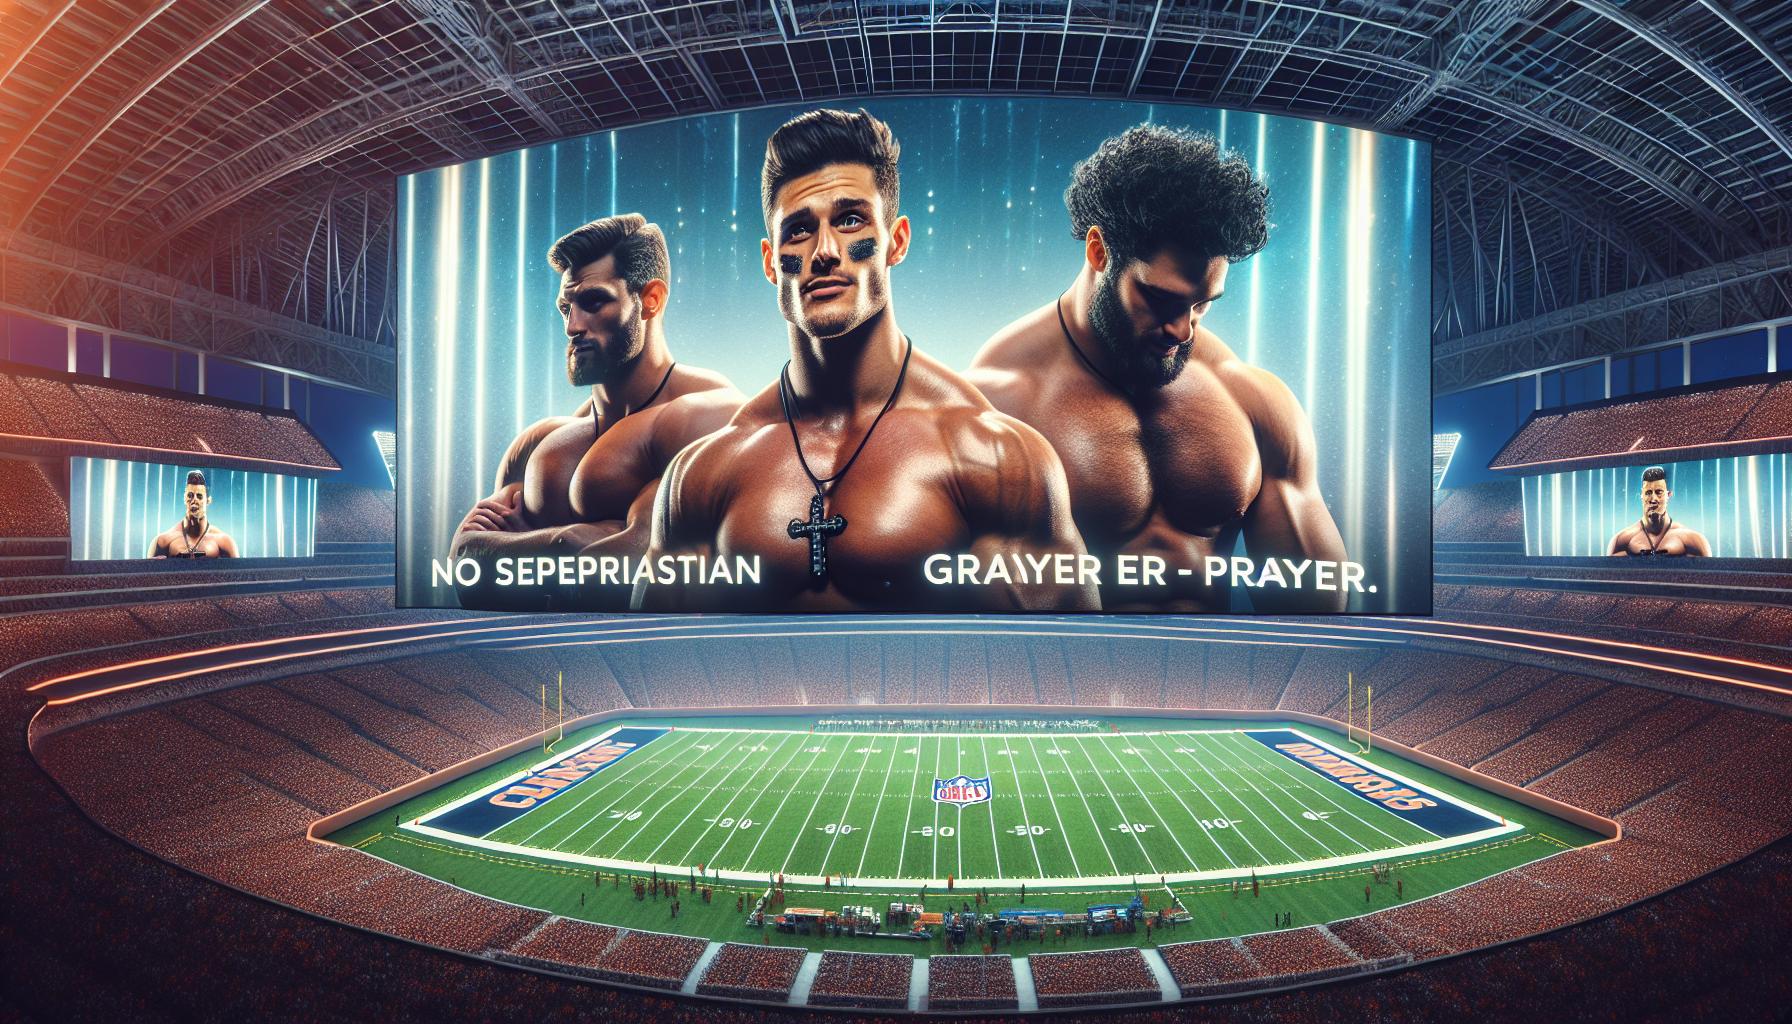 "Hallow Christian Prayer App Makes Historic Super Bowl Debut with Star-Studded Commercial" | FinOracle